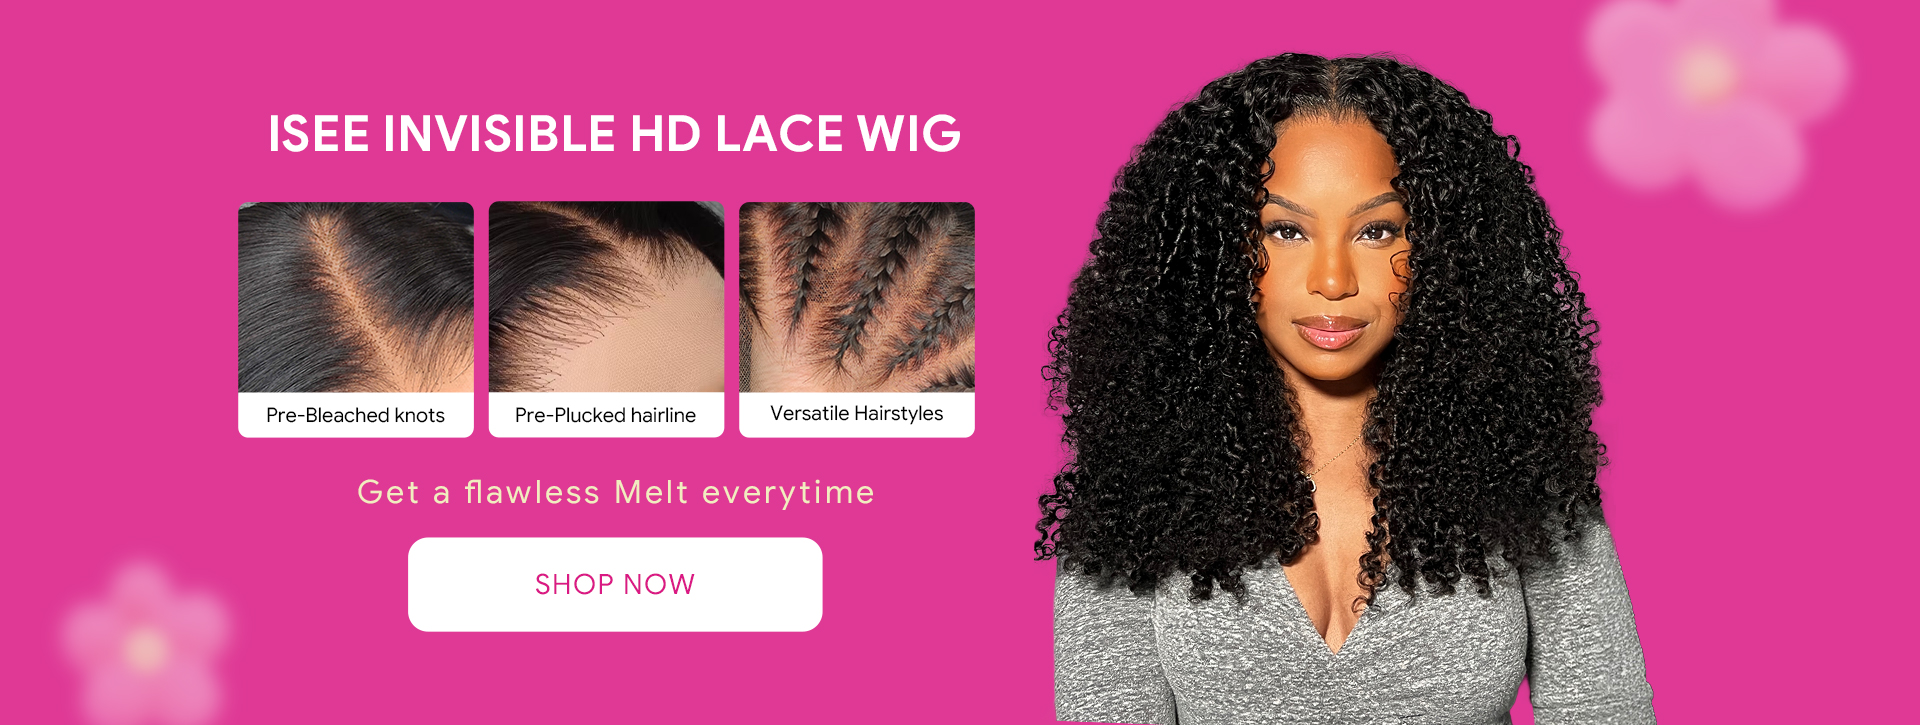 ISEE Spring Sale HD Lace Wig